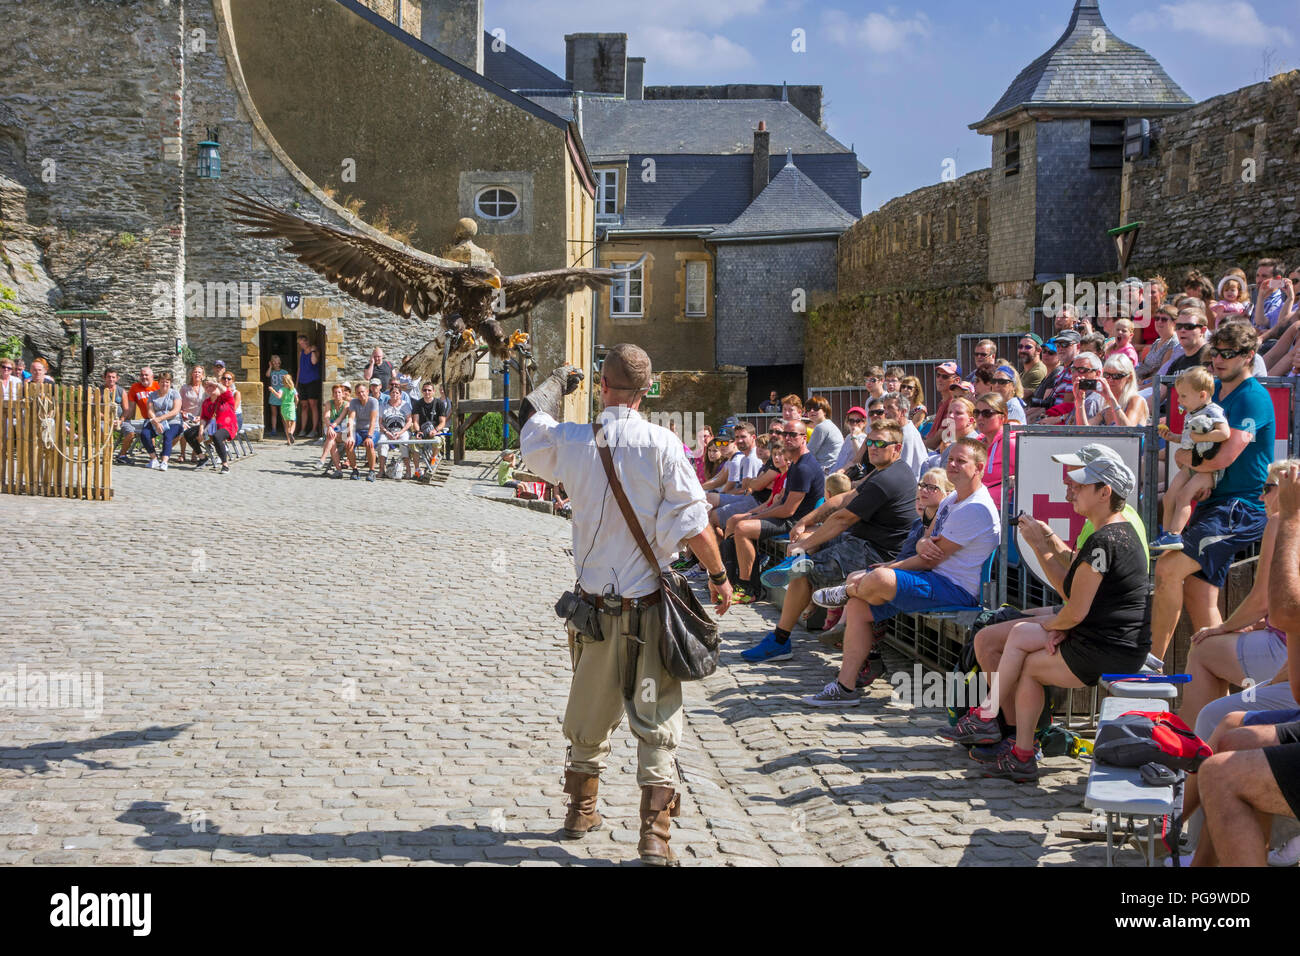 Tourists watching falconry / bird of prey show in the Château de Bouillon Castle, Luxembourg Province, Belgian Ardennes, Belgium Stock Photo